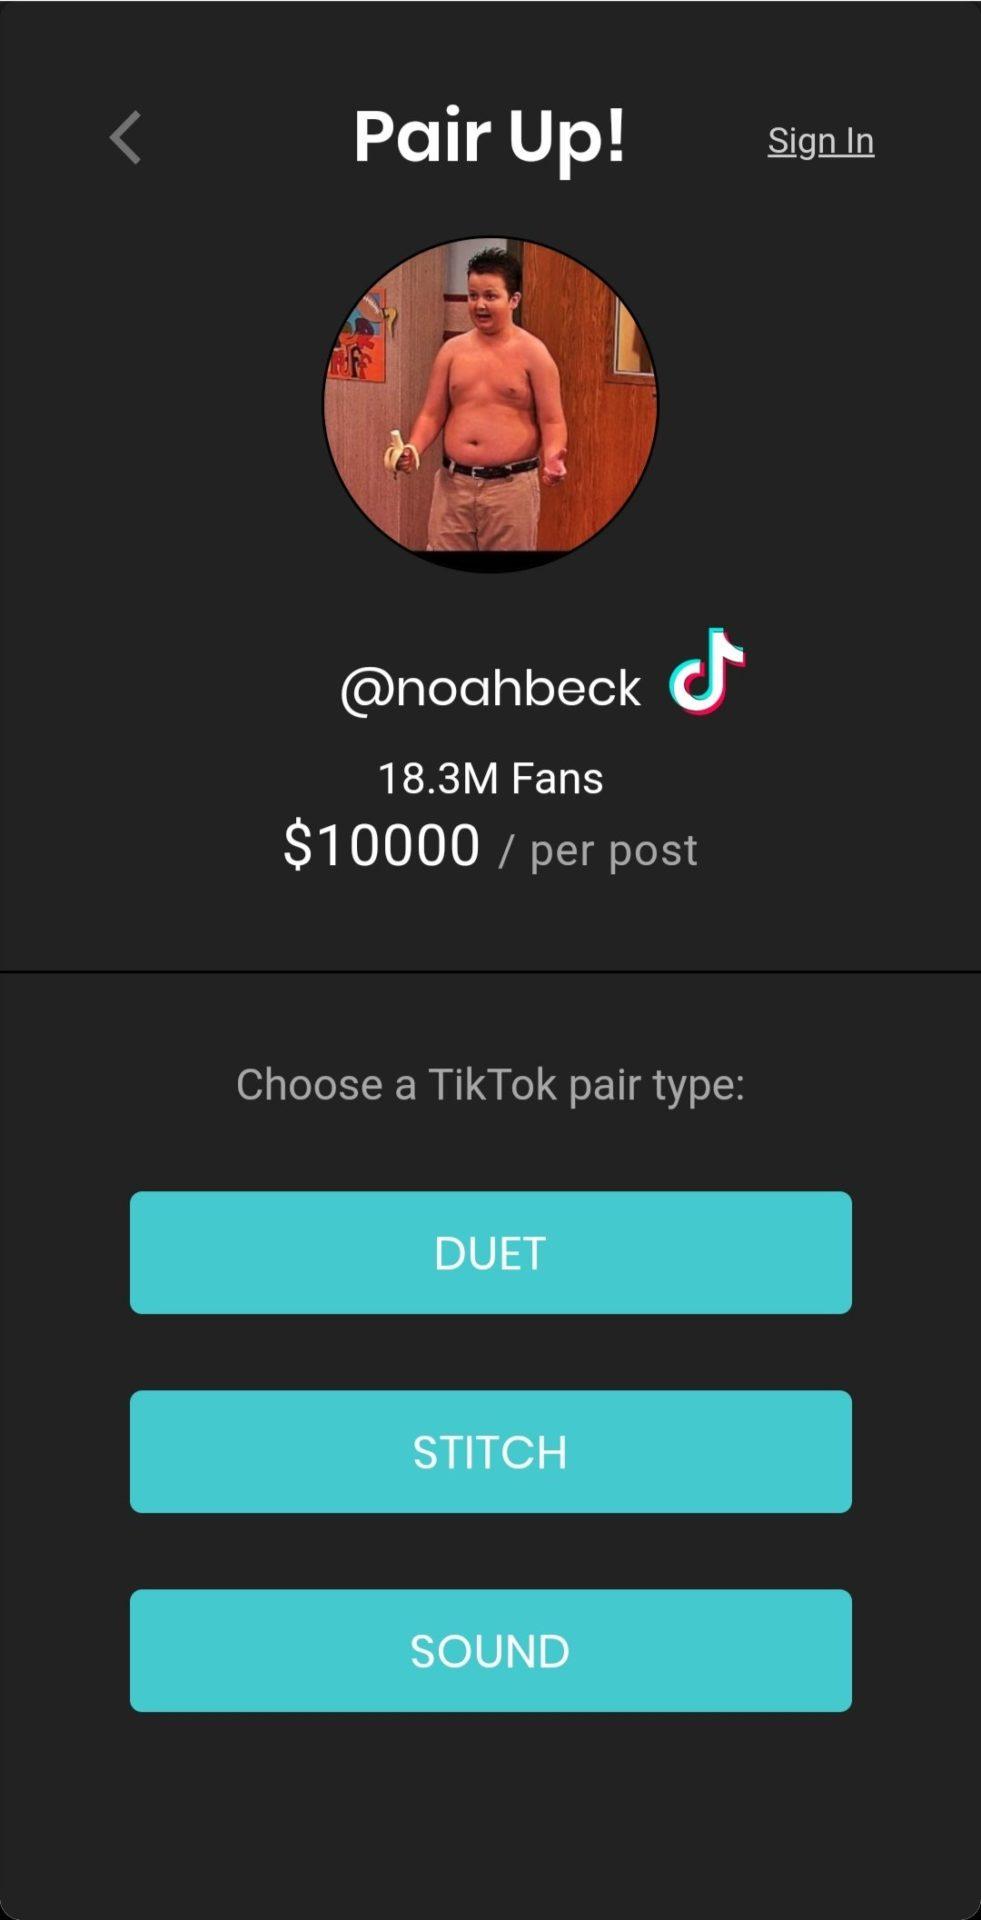 Noah Beck's TikTok advertising a $10,000 price point to duet with him.